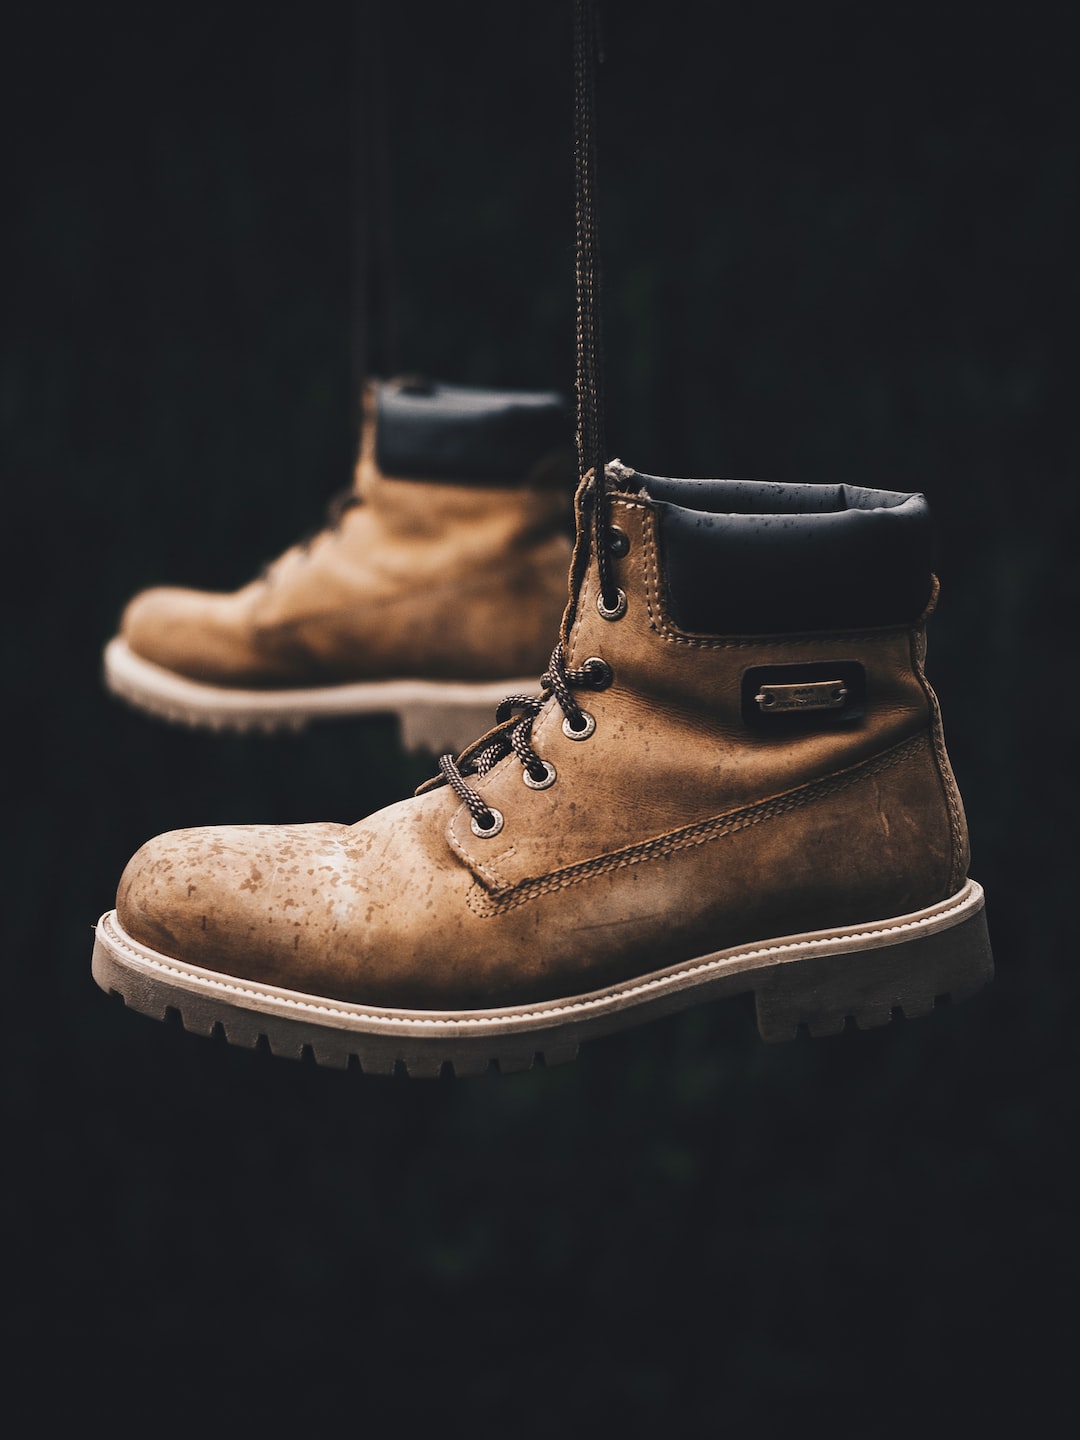 Finding the right boots for your needs requires knowing what can hinder your progress. Here are common boot buying errors and how to avoid them.